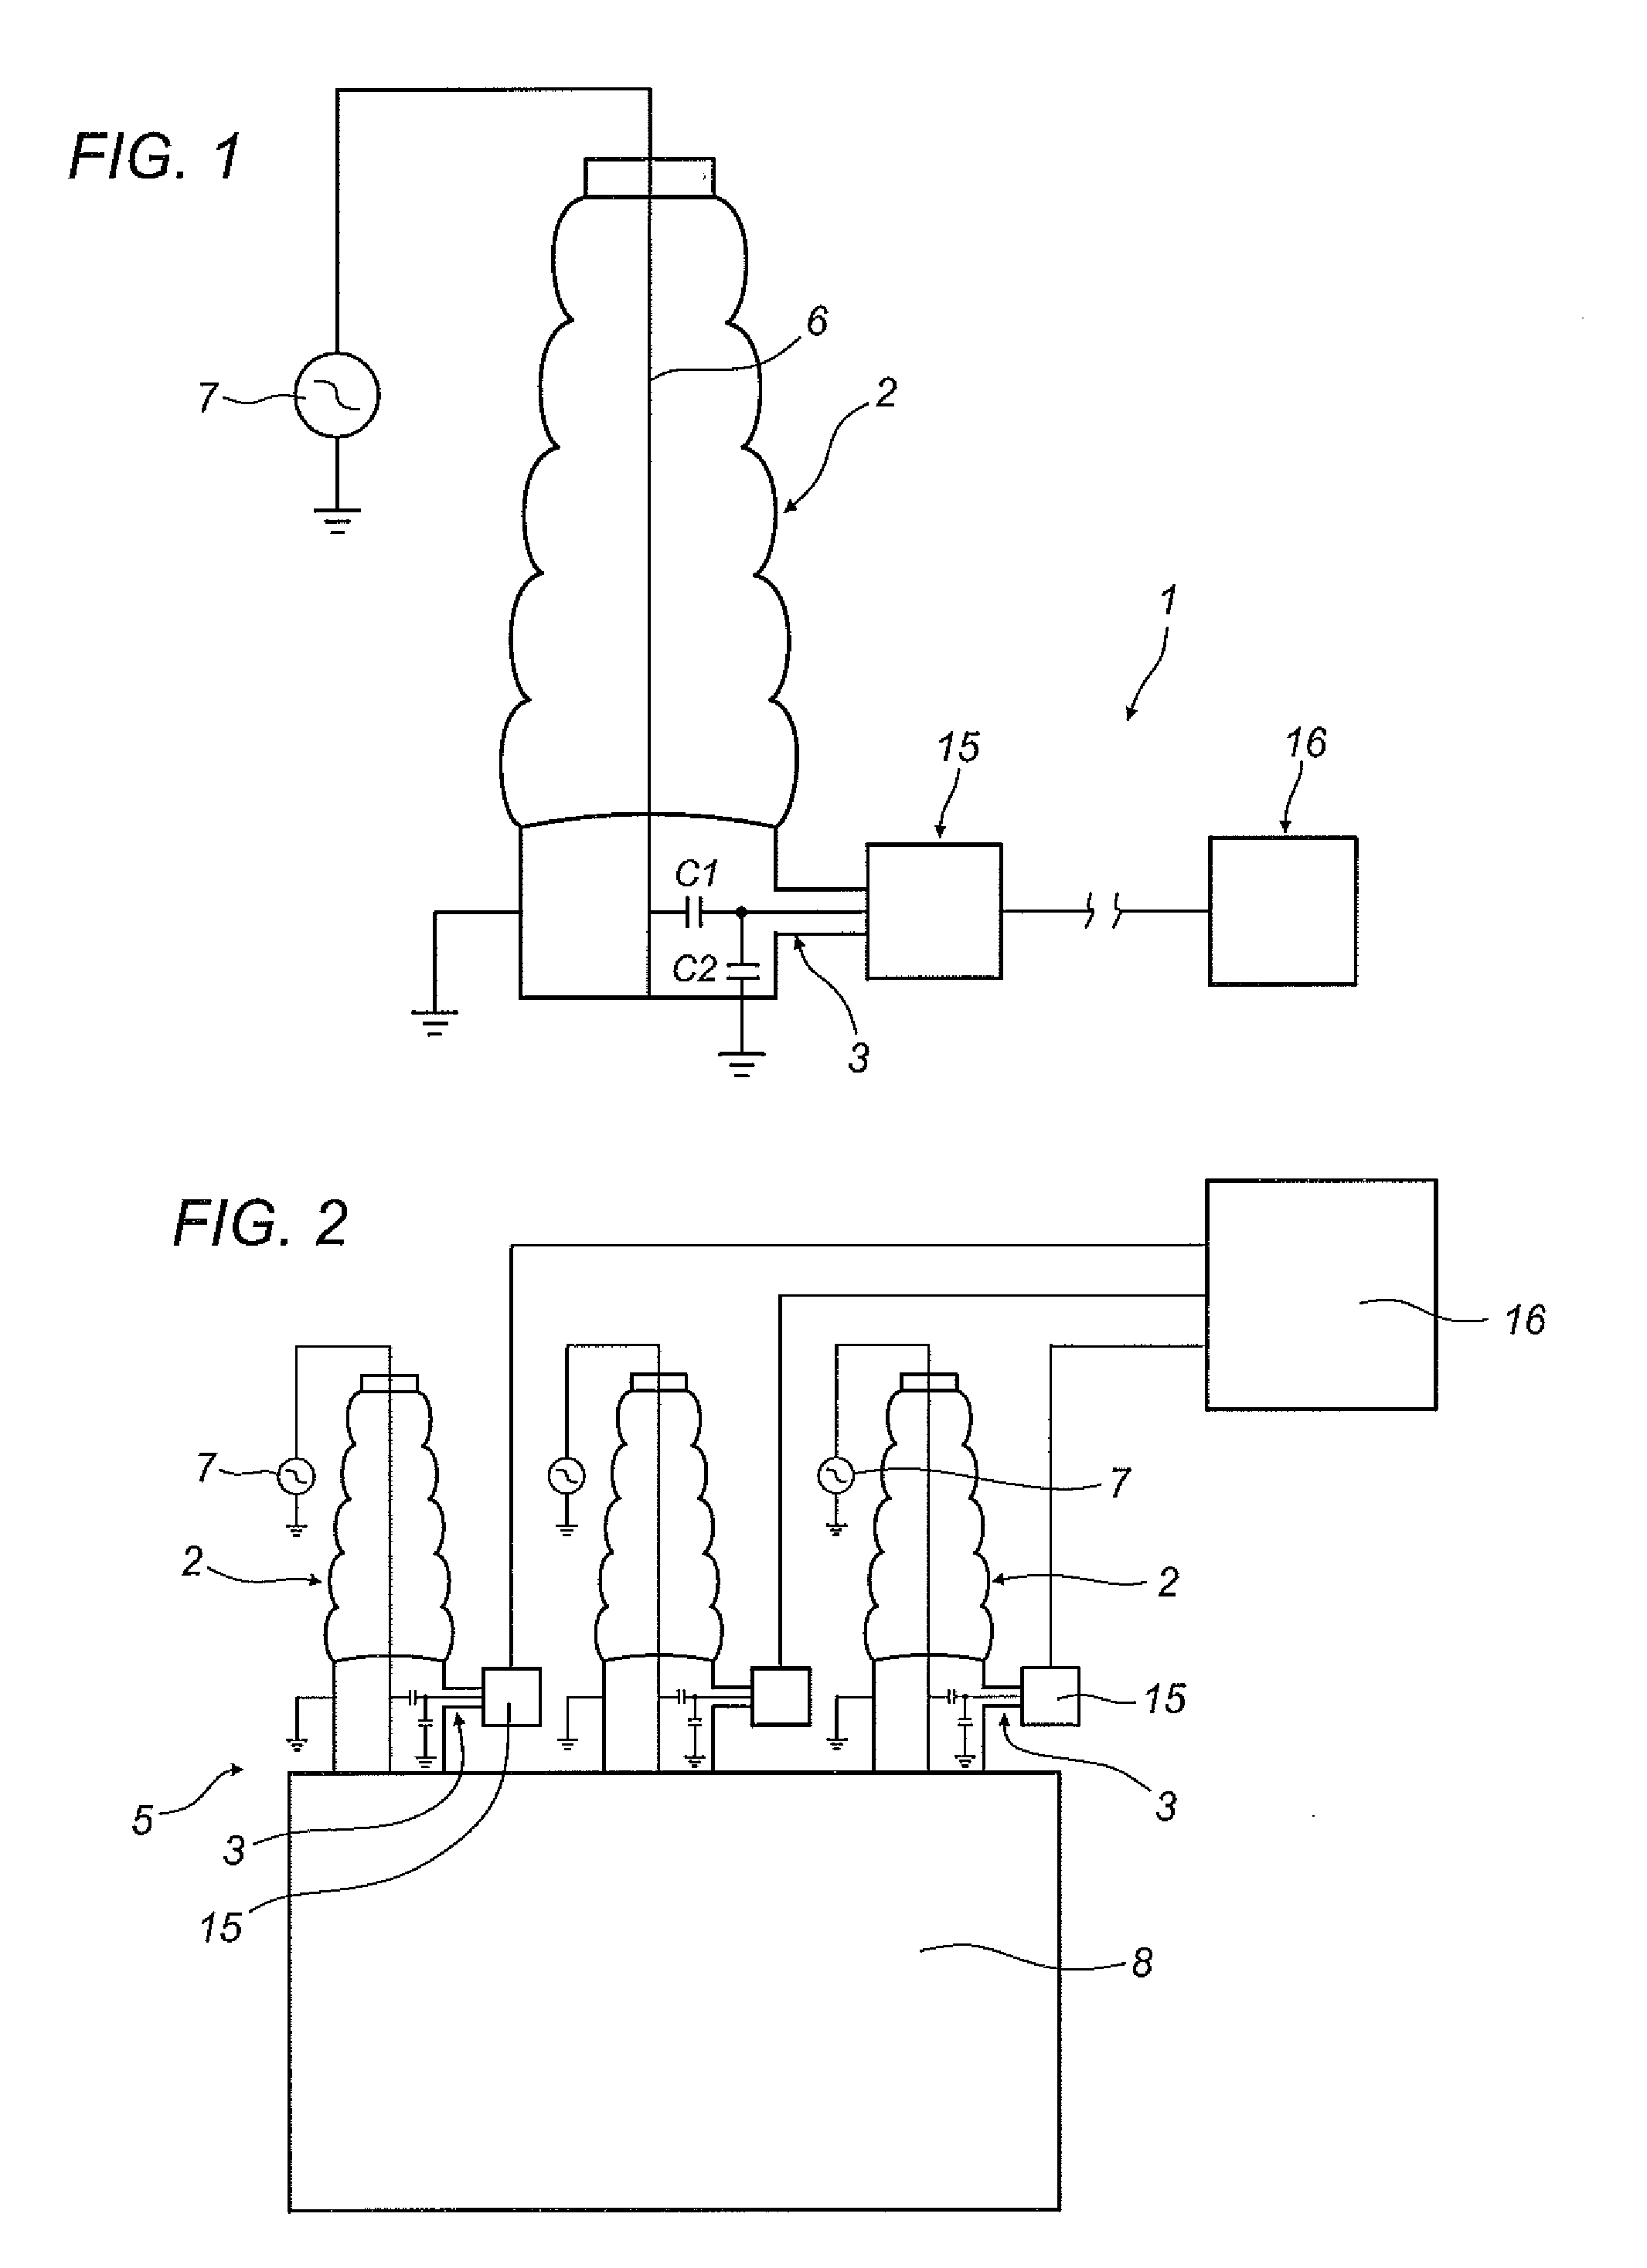 Apparatus and method for measuring the dissipation factor of an insulator